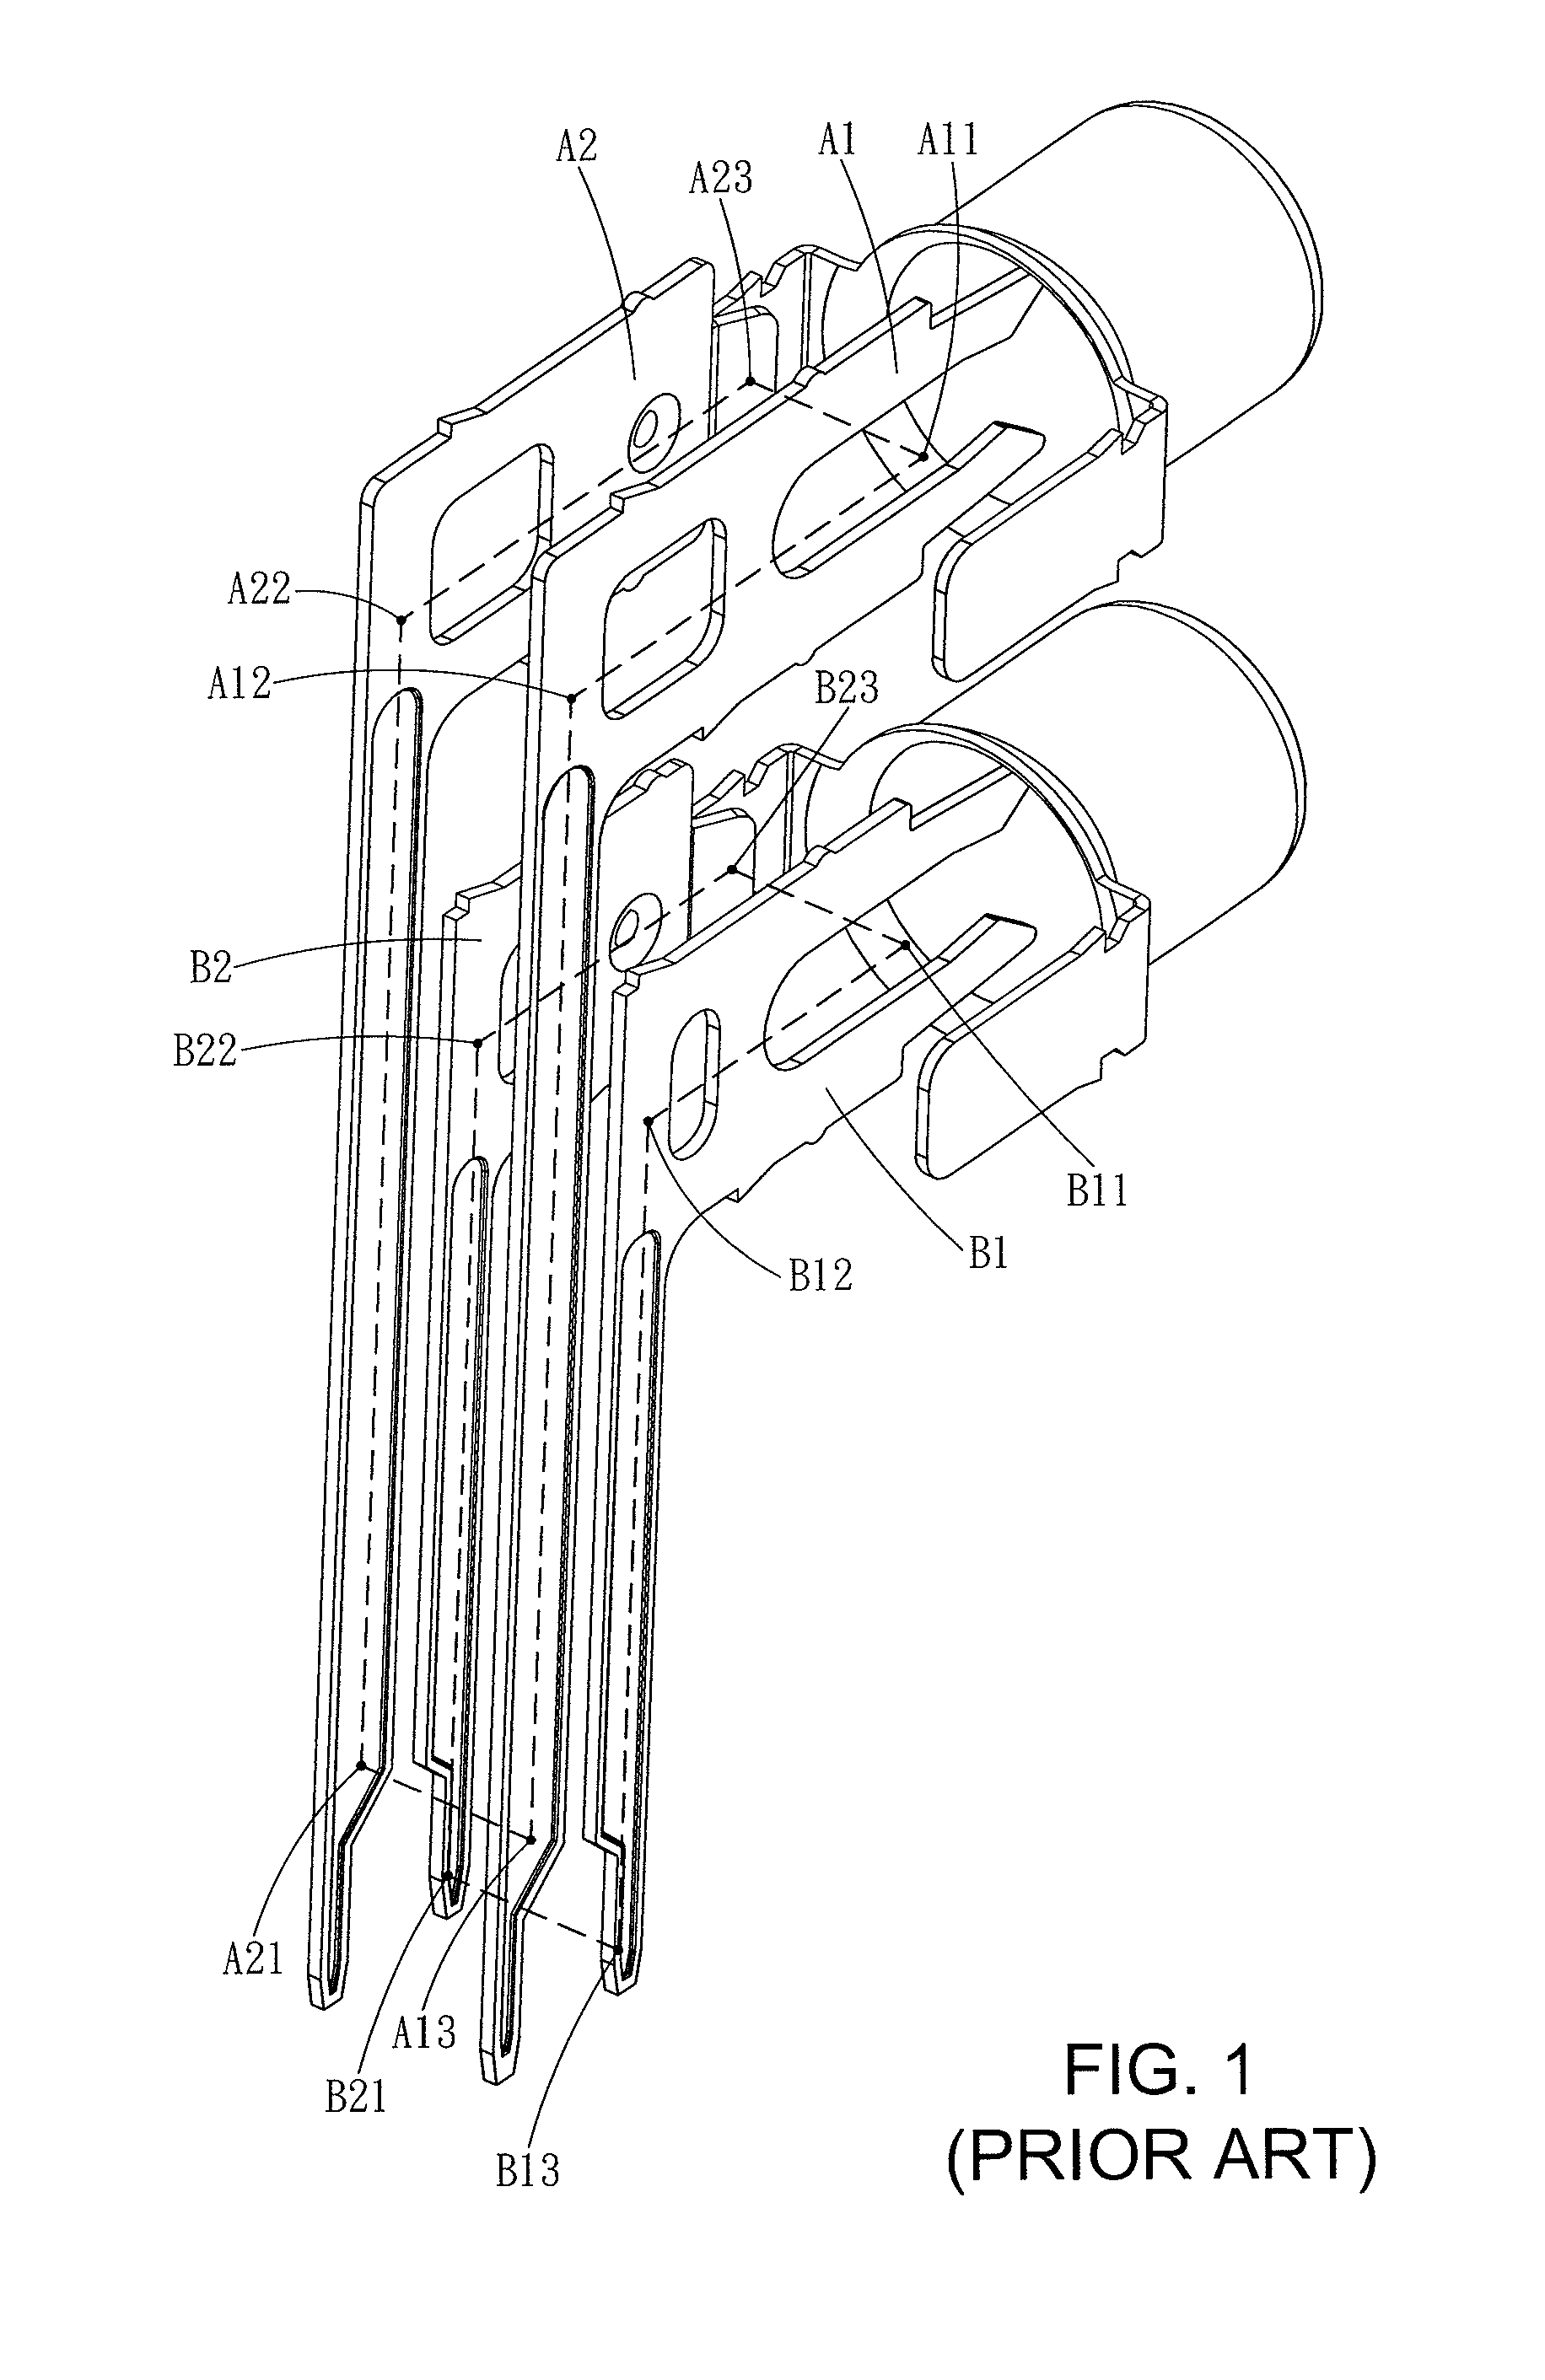 Electrical connector for reducing high frequency crosstalk interferences